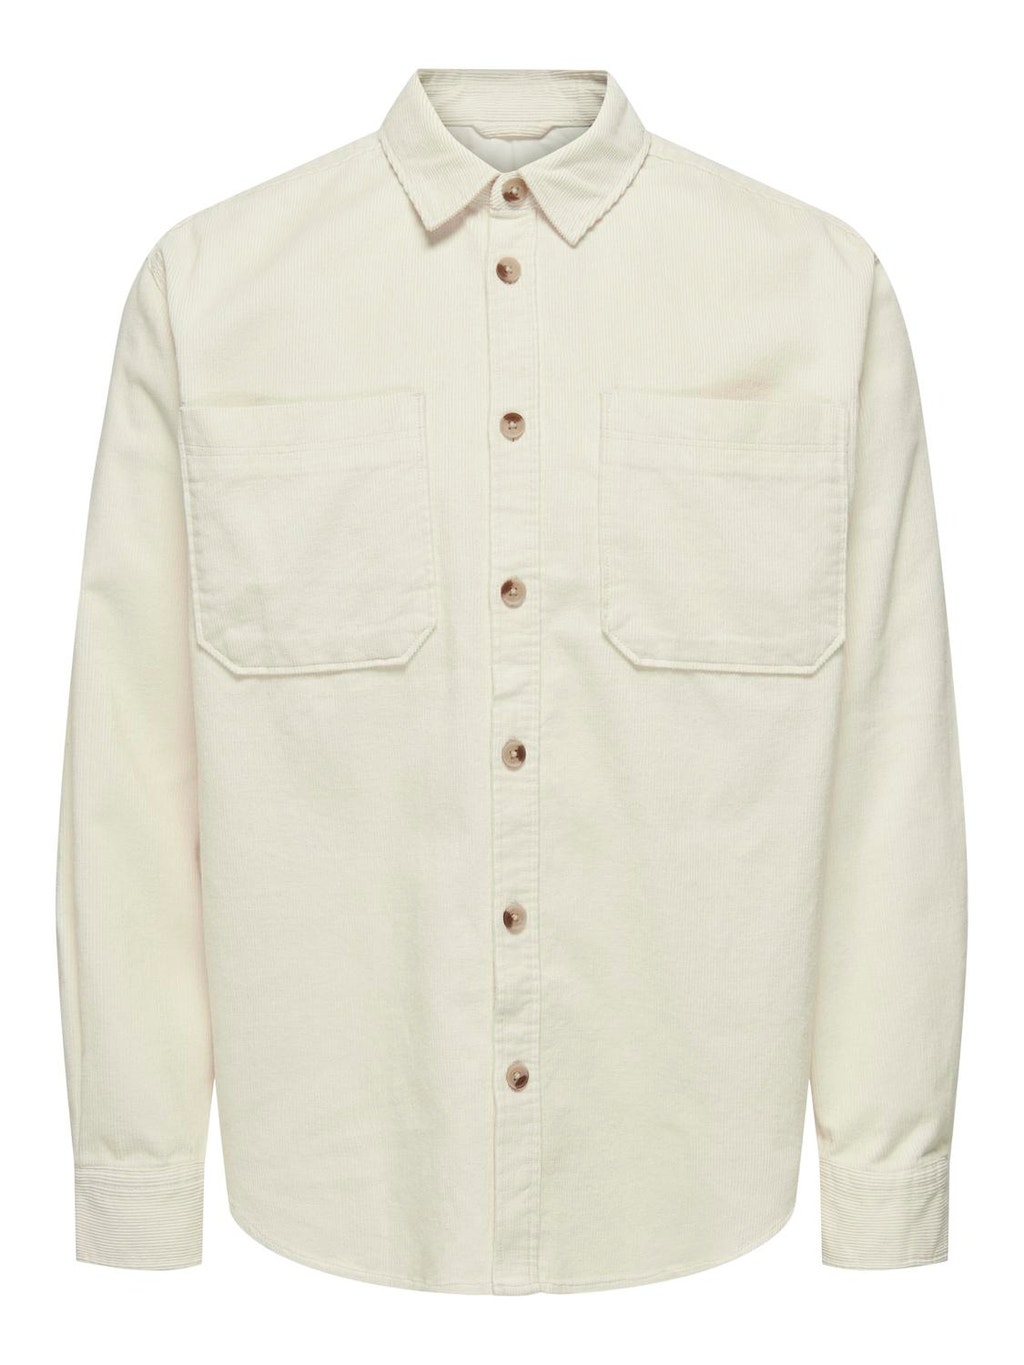 Relaxed Fit Corduroy shirt | White | ONLY & SONS®